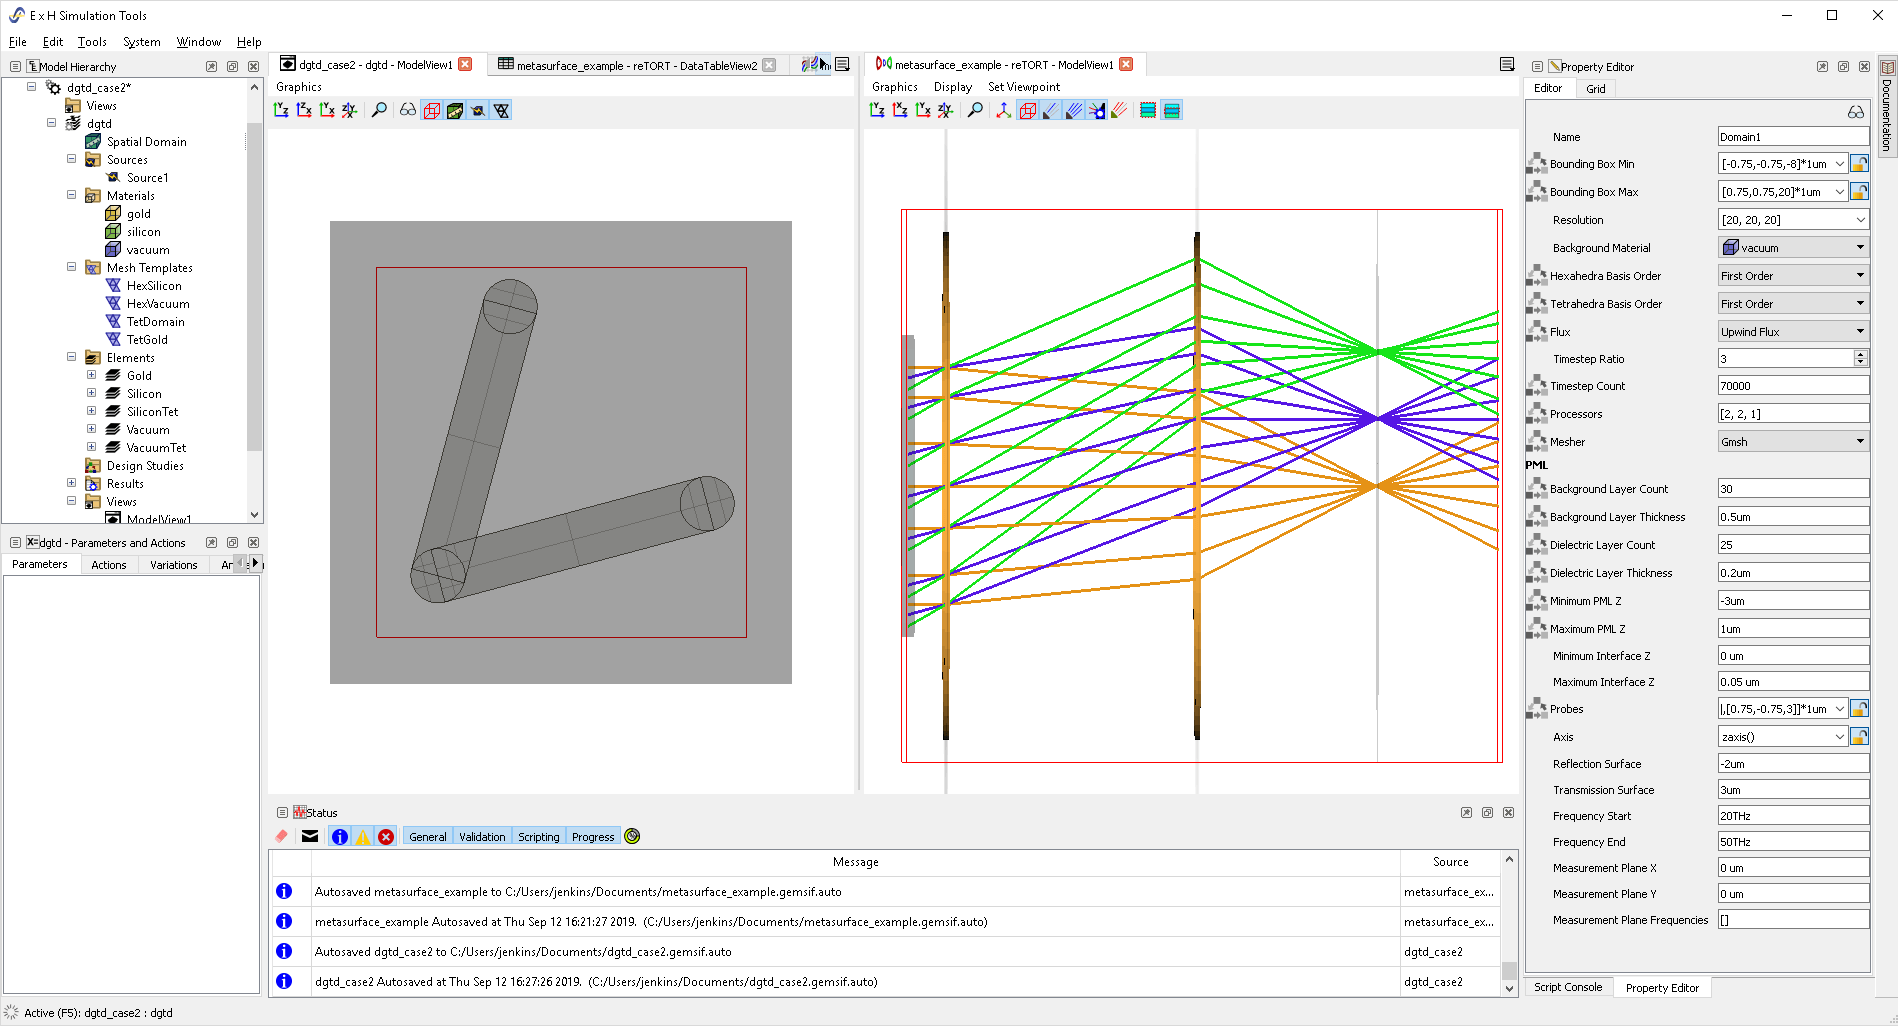 GEMSIF - GEometry, Modeling, and Simulation InterFace